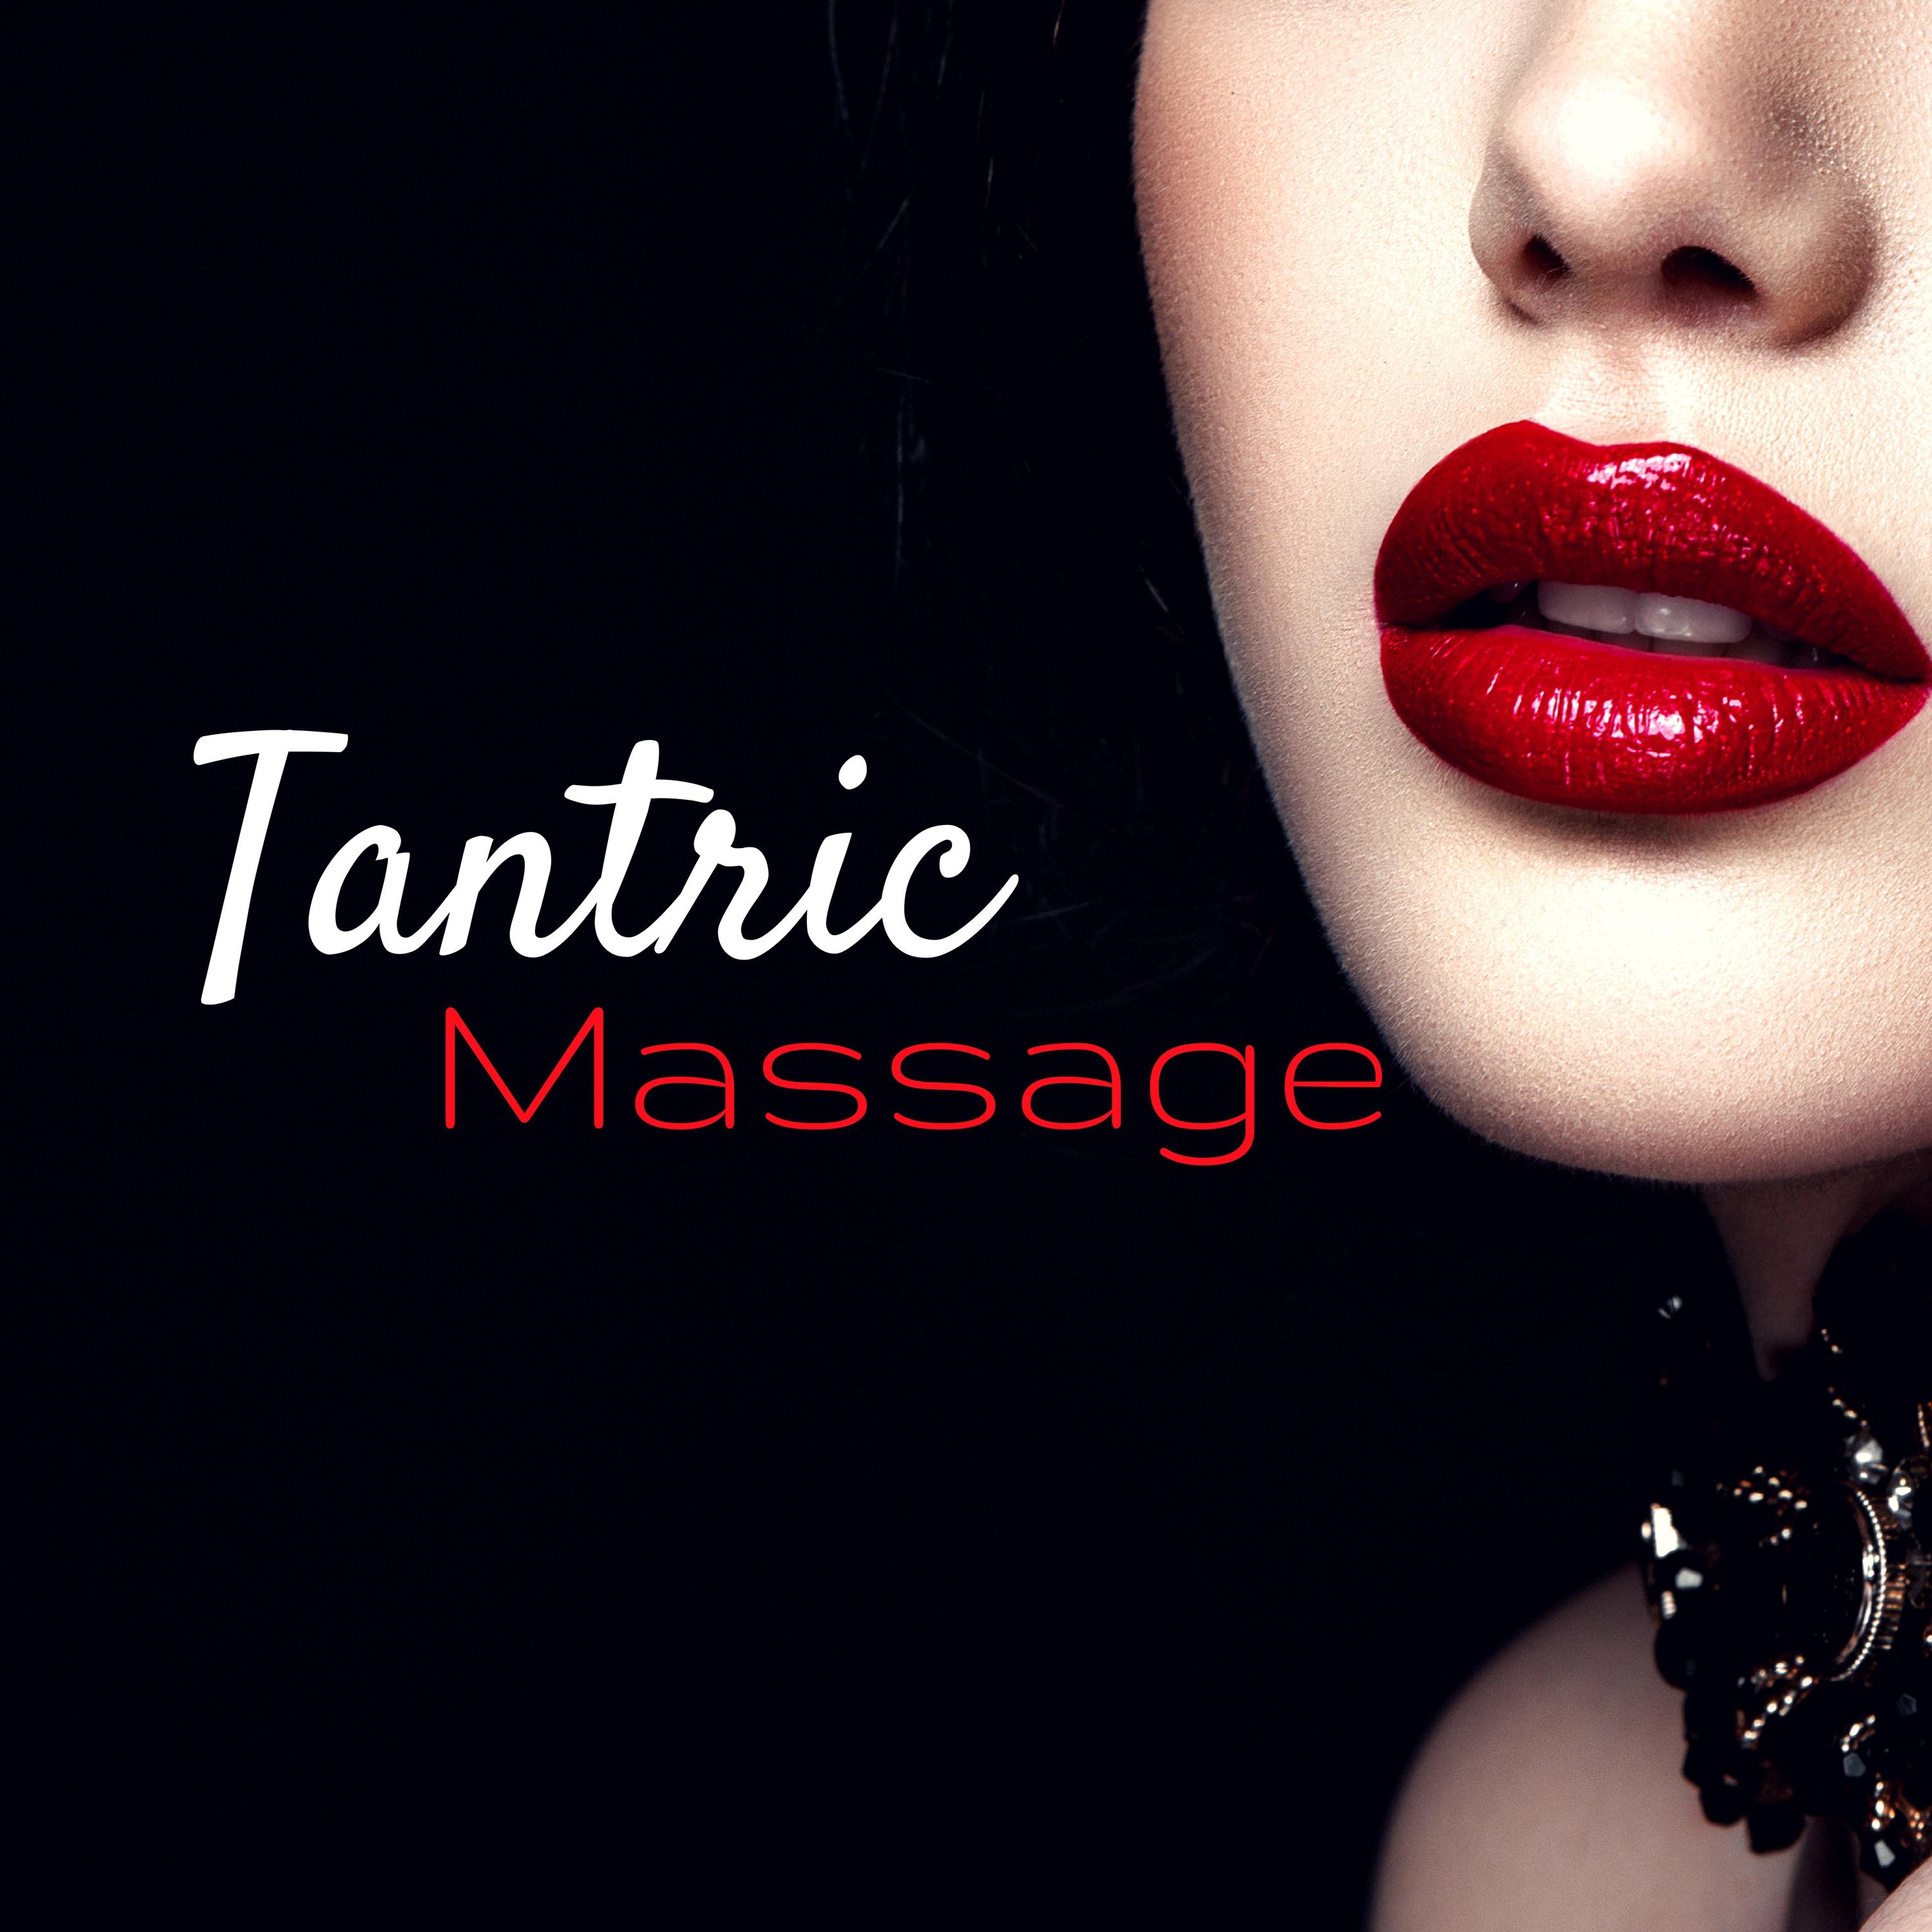 Tantric Massage - Erotic Chillout Music for Lovemaking and Lounge Background for Intimacy